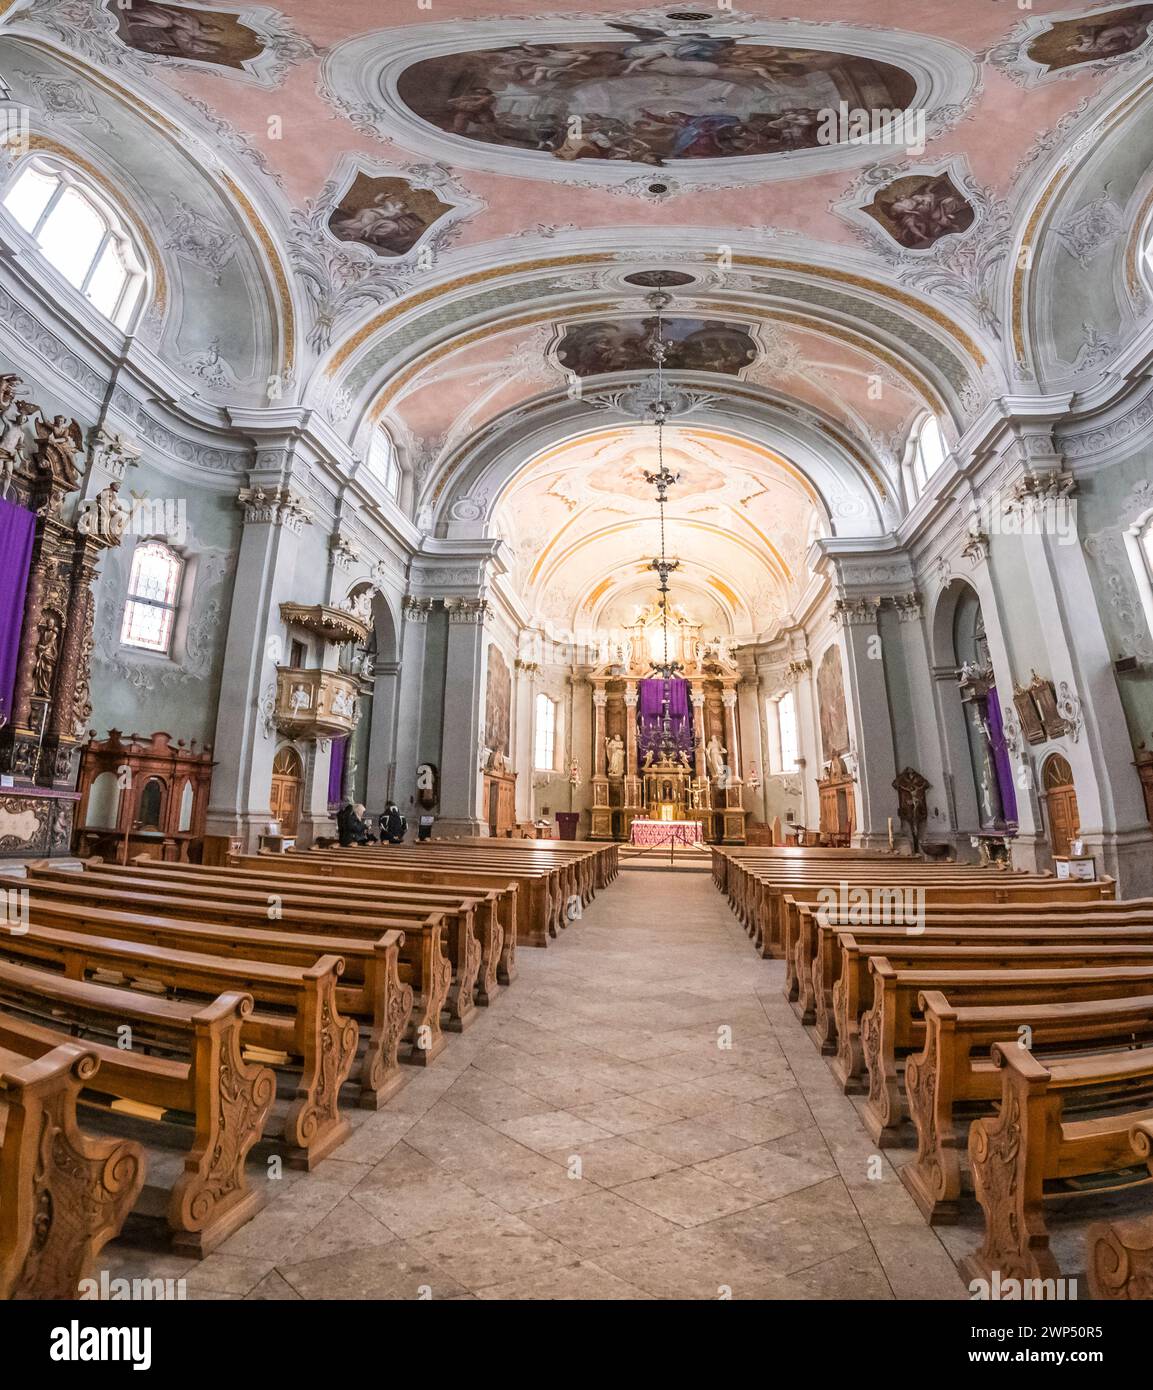 This  is of the interior of the Basilica Minore di Santi Flippo e Giacomo church in the resort town of Cortina d'Ampezzo located in the Dolomites Stock Photo